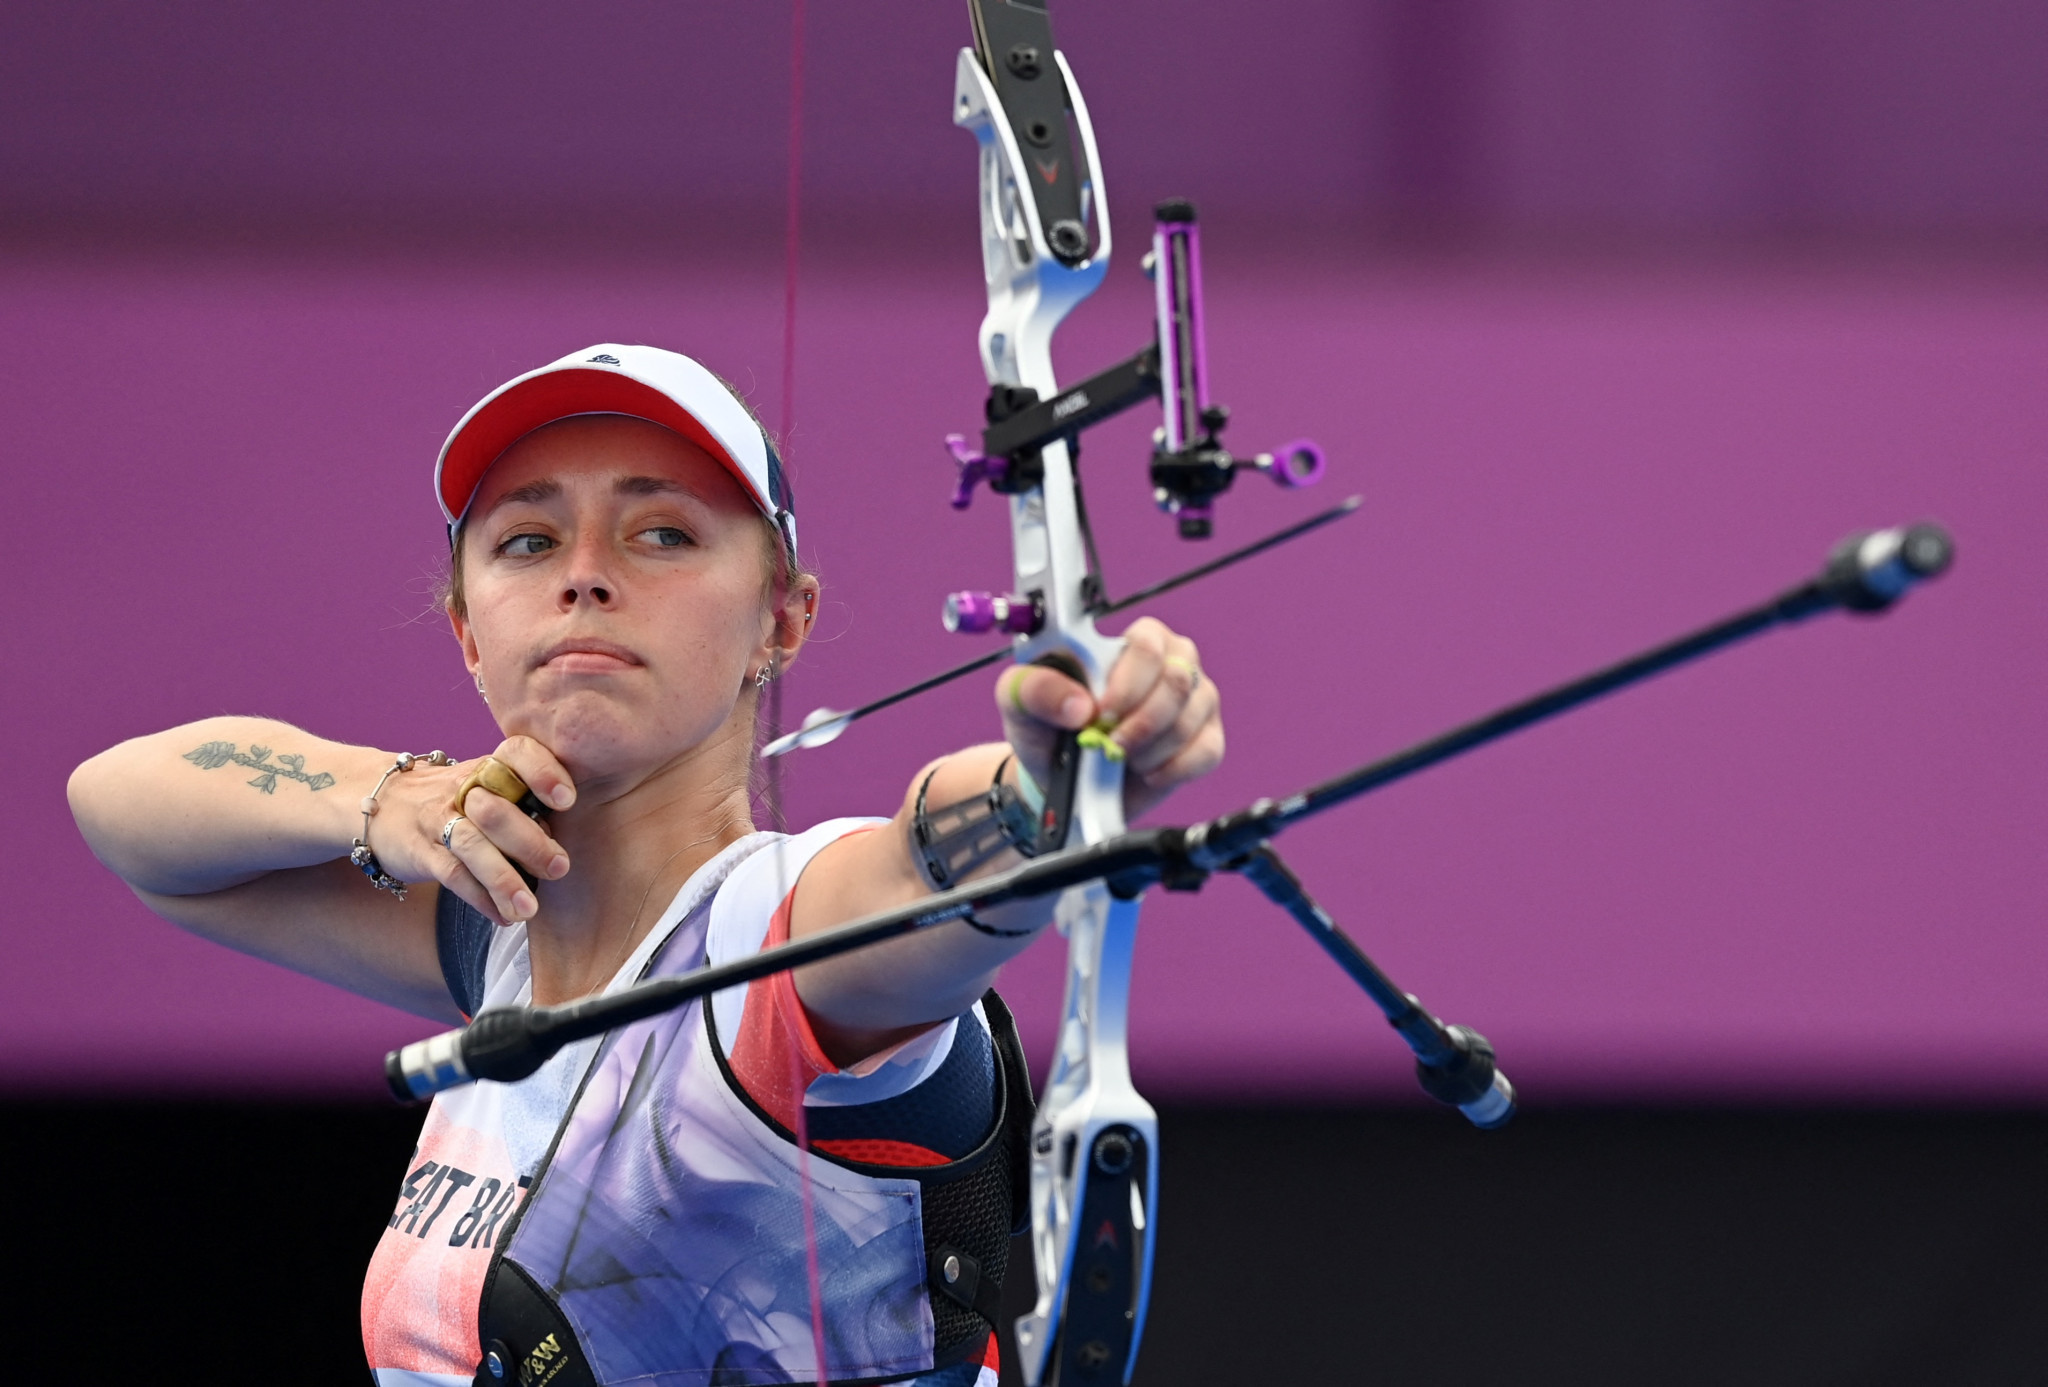 Britain's Bryony Pitman won women's individual and team recurve gold at the Archery World Cup in Antalya ©Getty Images